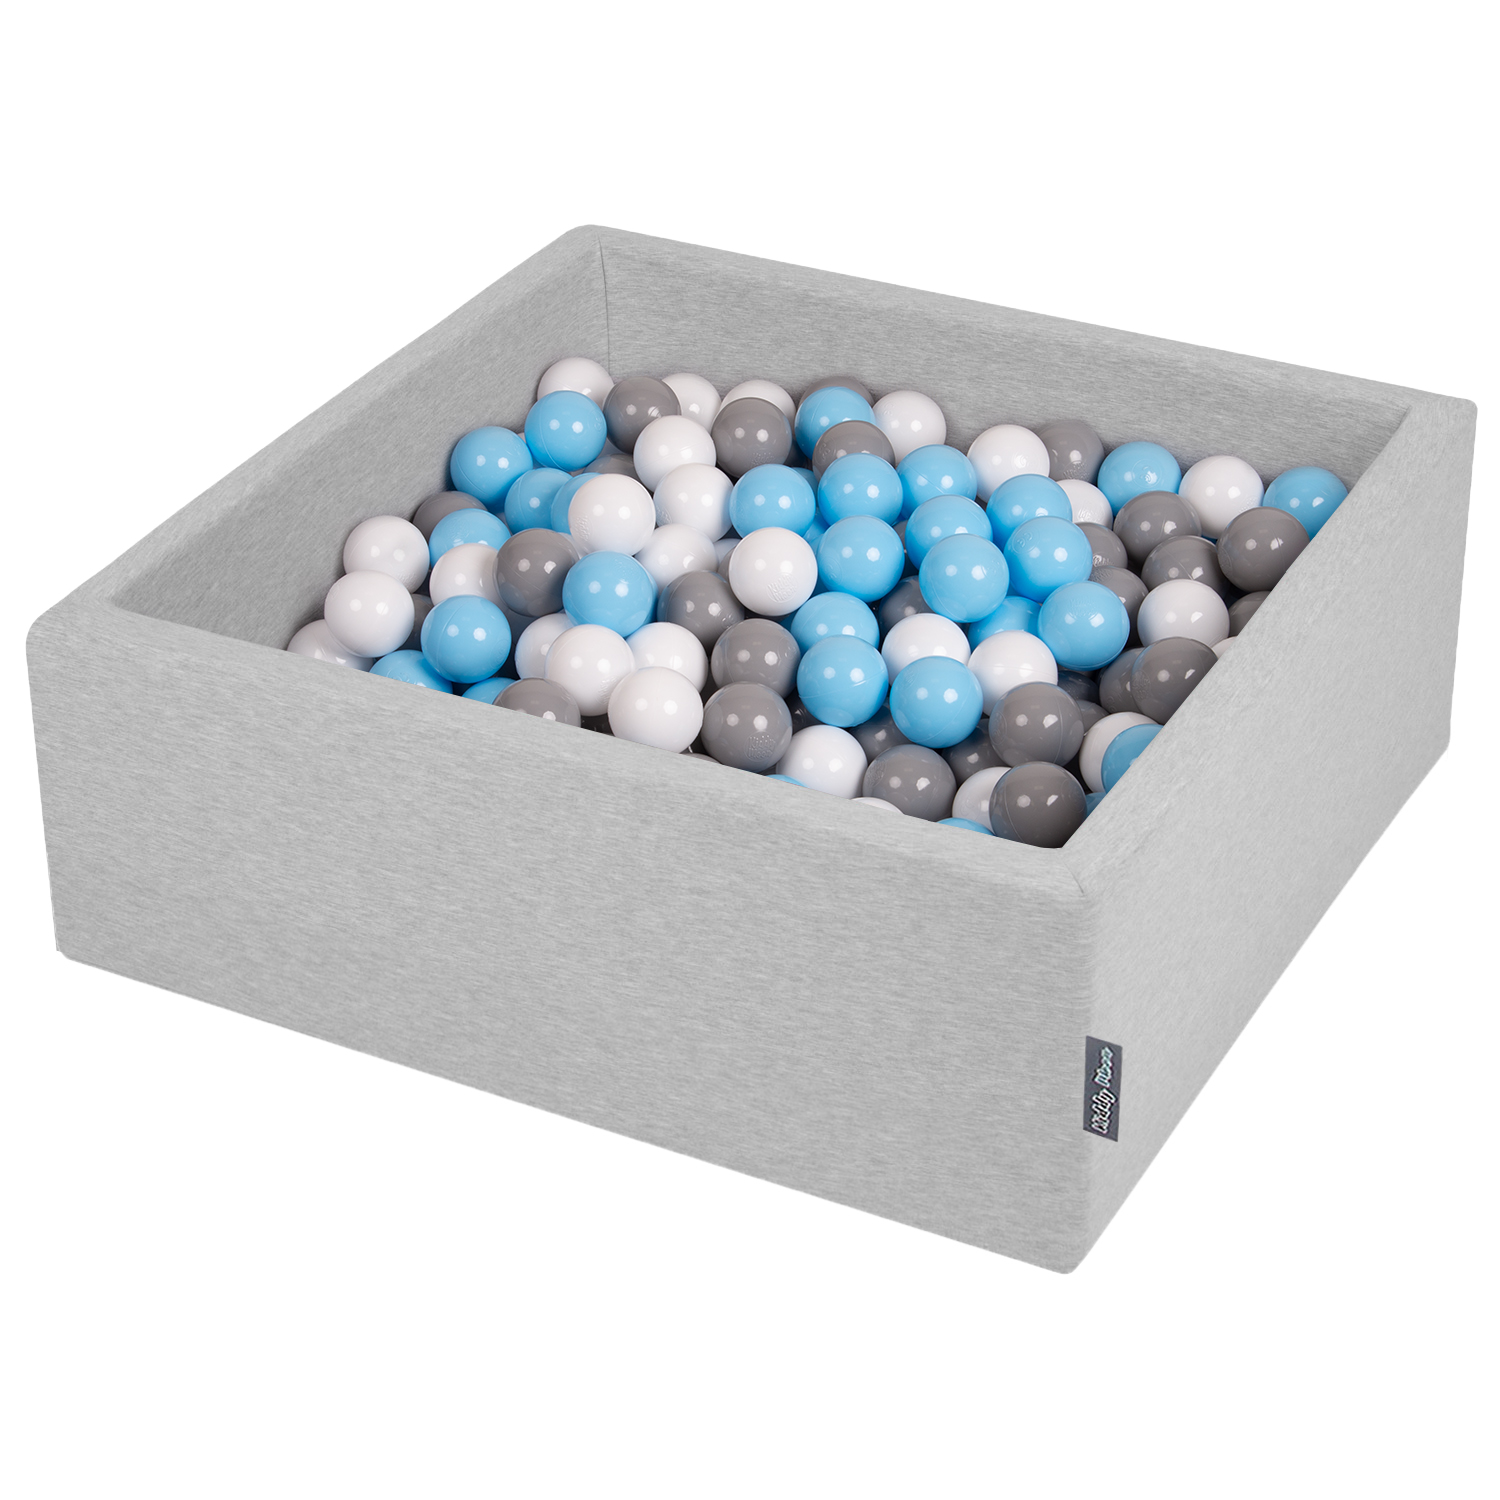 KiddyMoon New Soft Baby Ball Pit Foam Square 90x40 with 200/300 Balls,MultiColor 